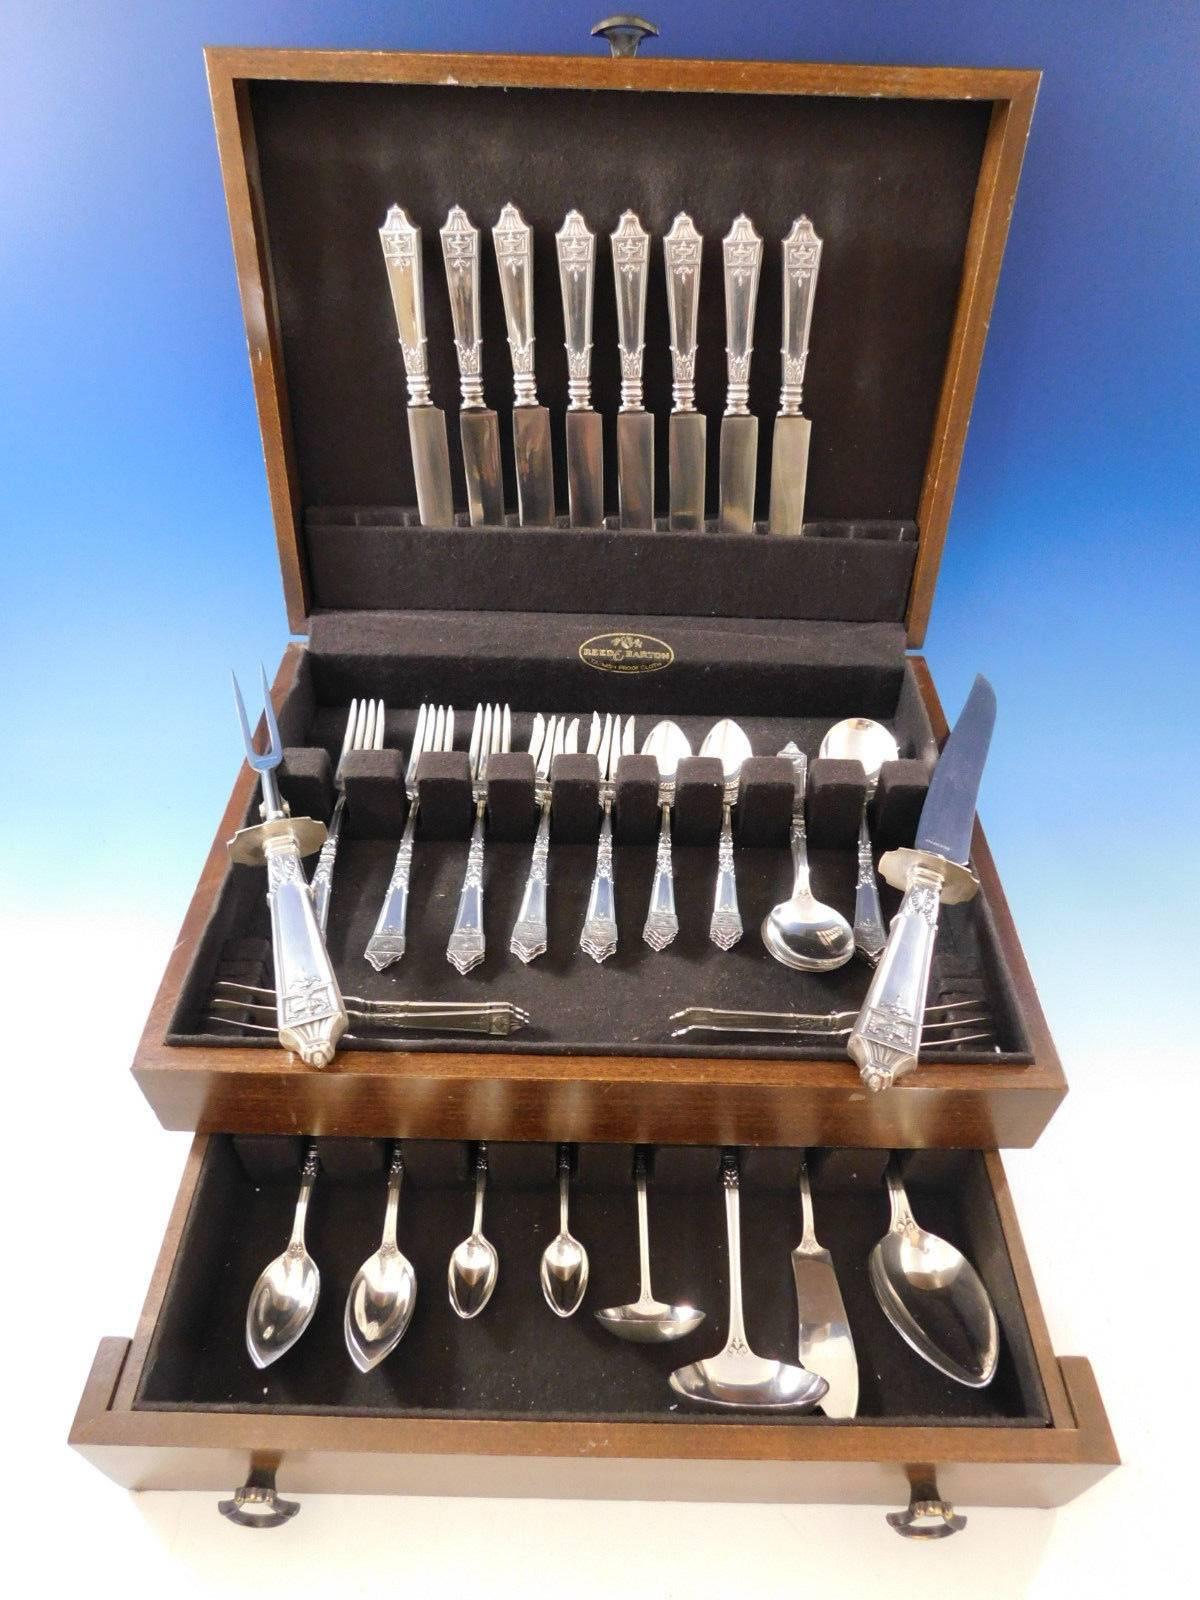 Lansdowne by Gorham sterling silver flatware set - 71 pieces. This set includes:

Eight knives, 8 1/2